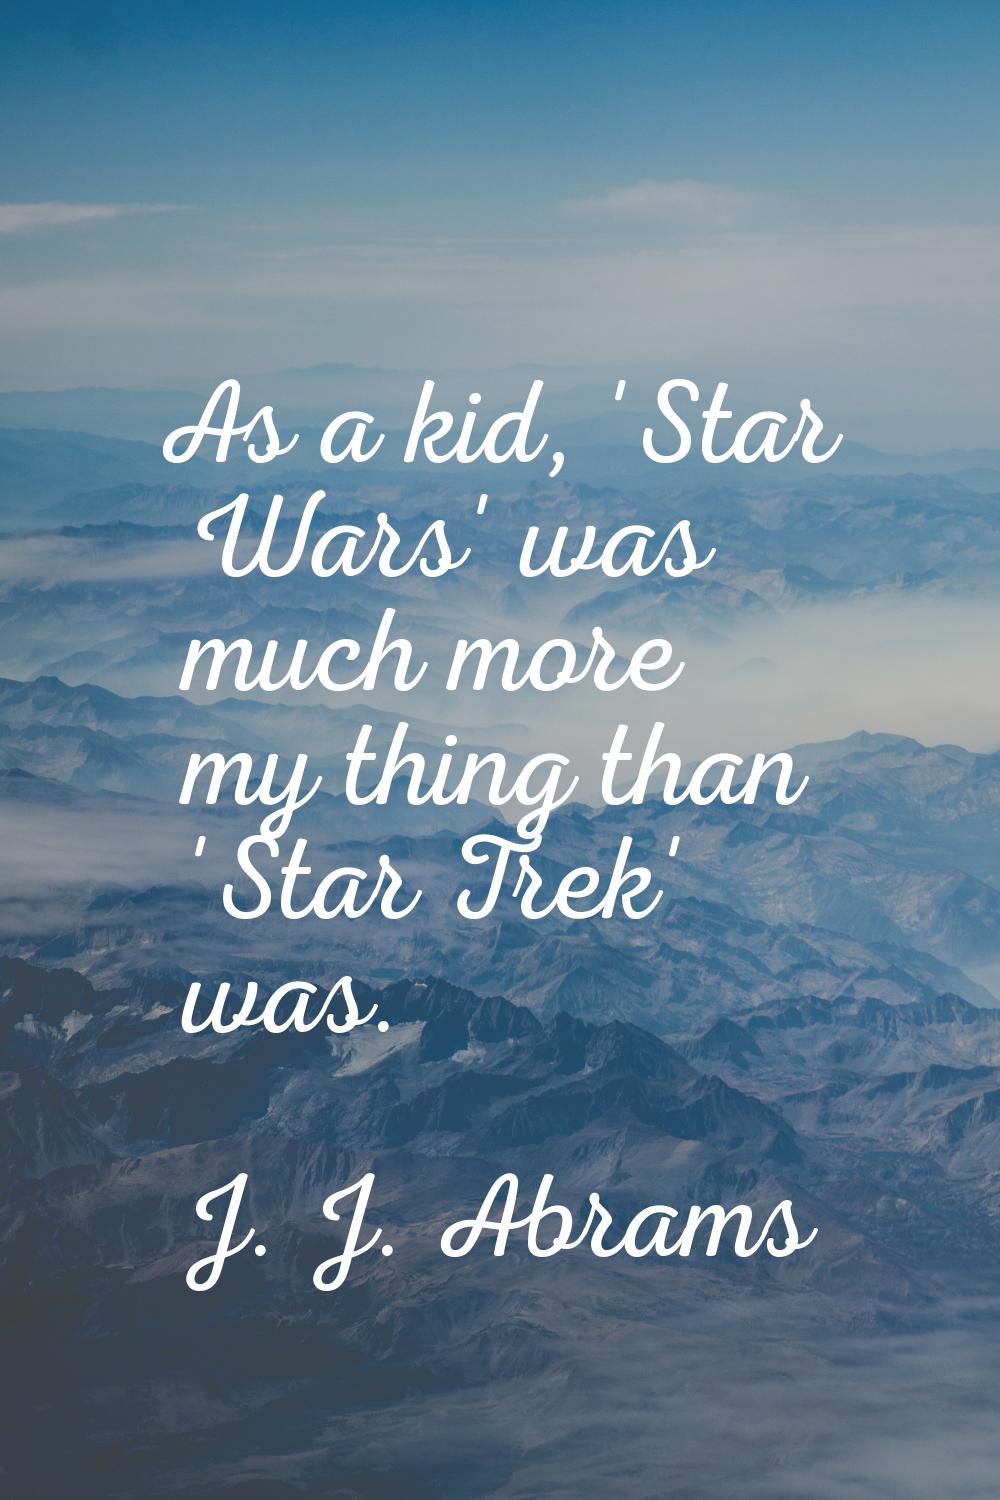 As a kid, 'Star Wars' was much more my thing than 'Star Trek' was.